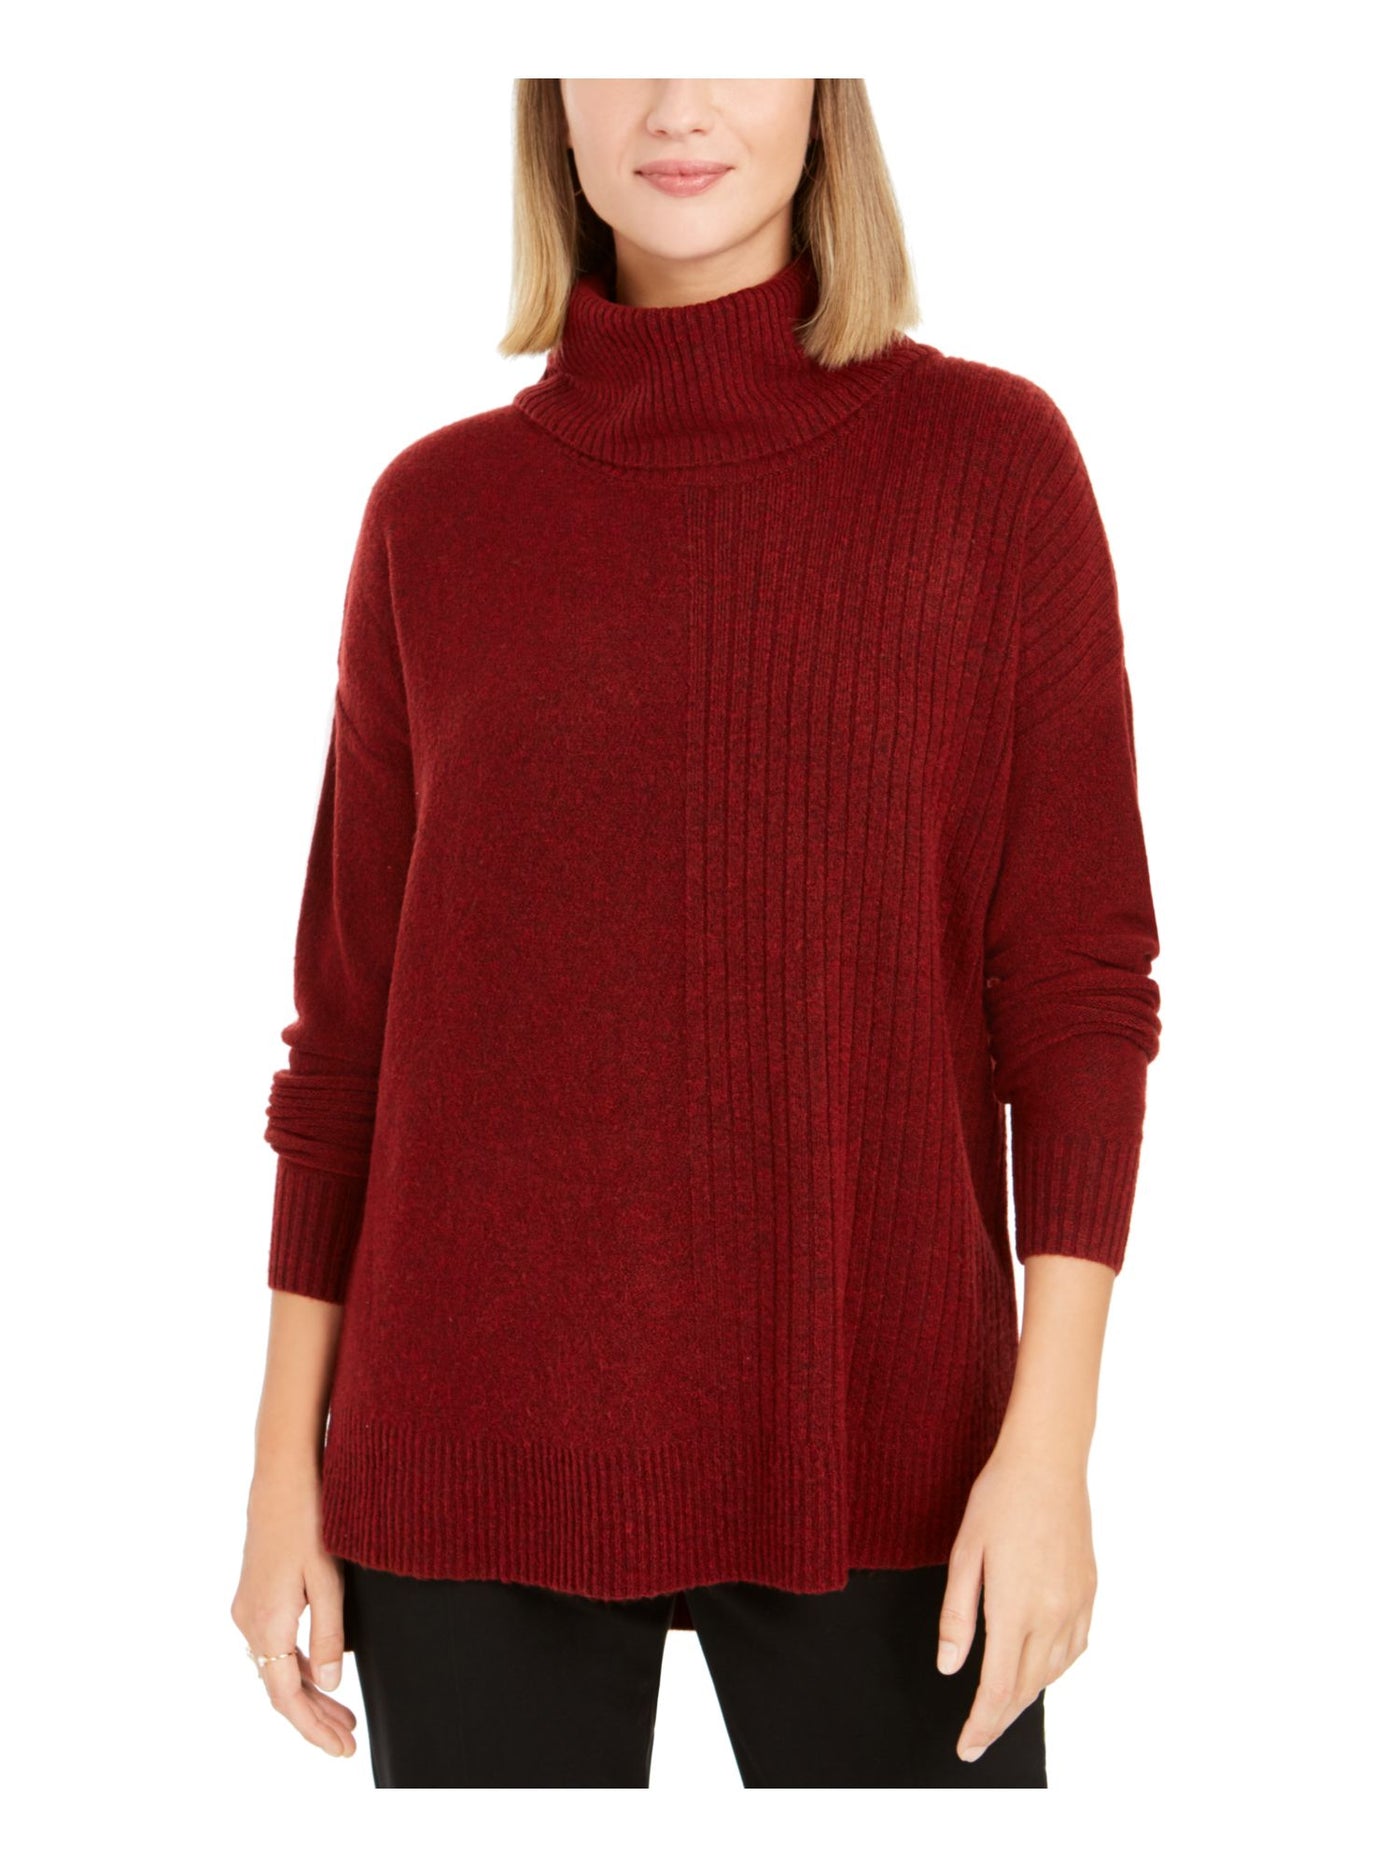 STYLE & COMPANY Womens Textured Ribbed Ribbed Long Sleeve Turtle Neck Sweater